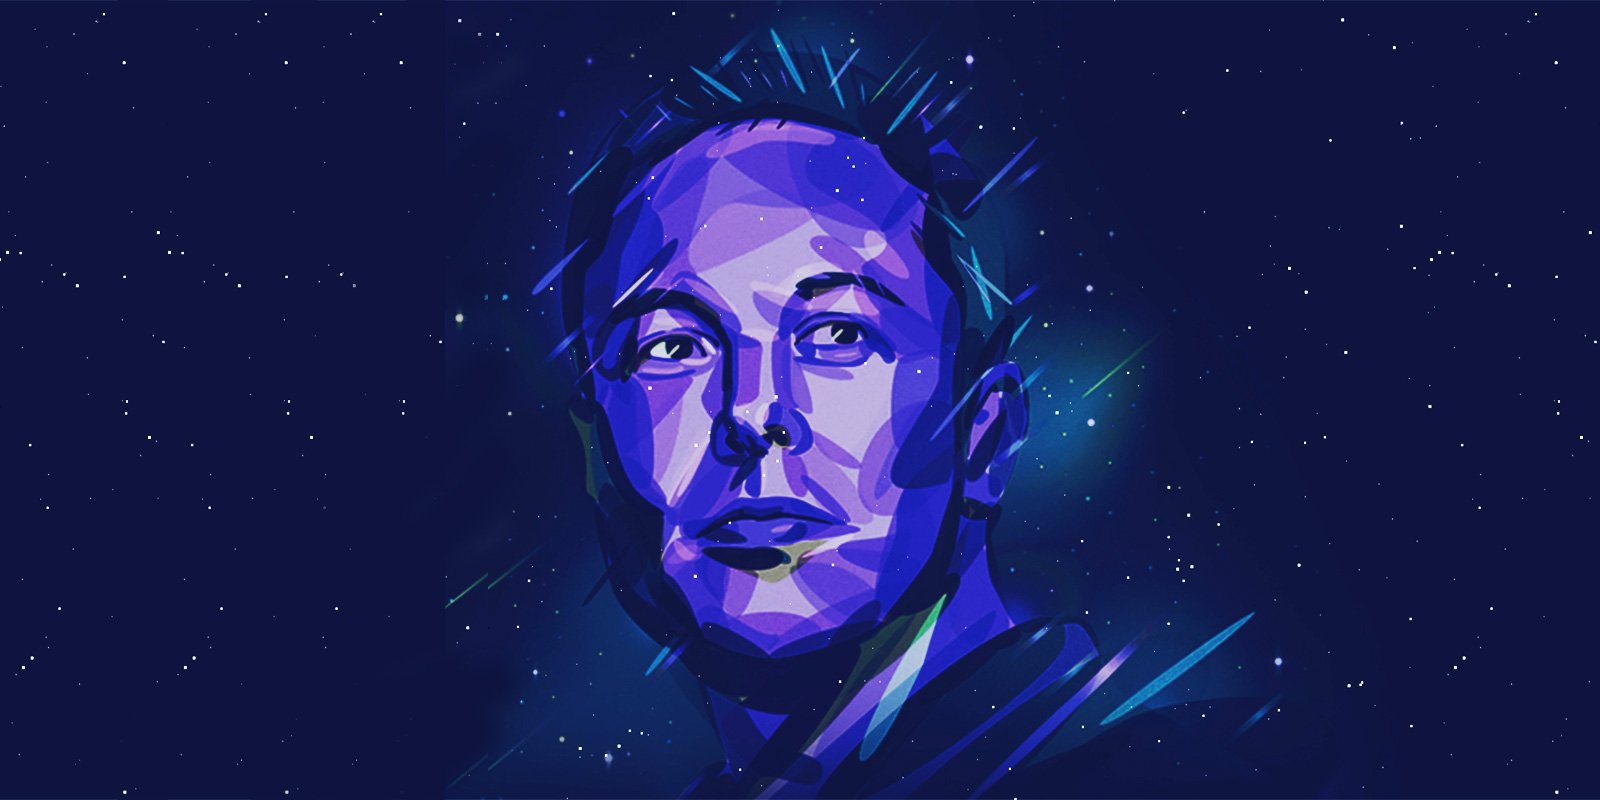 Fake crypto giveaways reuse YouTube videos of Musk, Dorsey to make millions